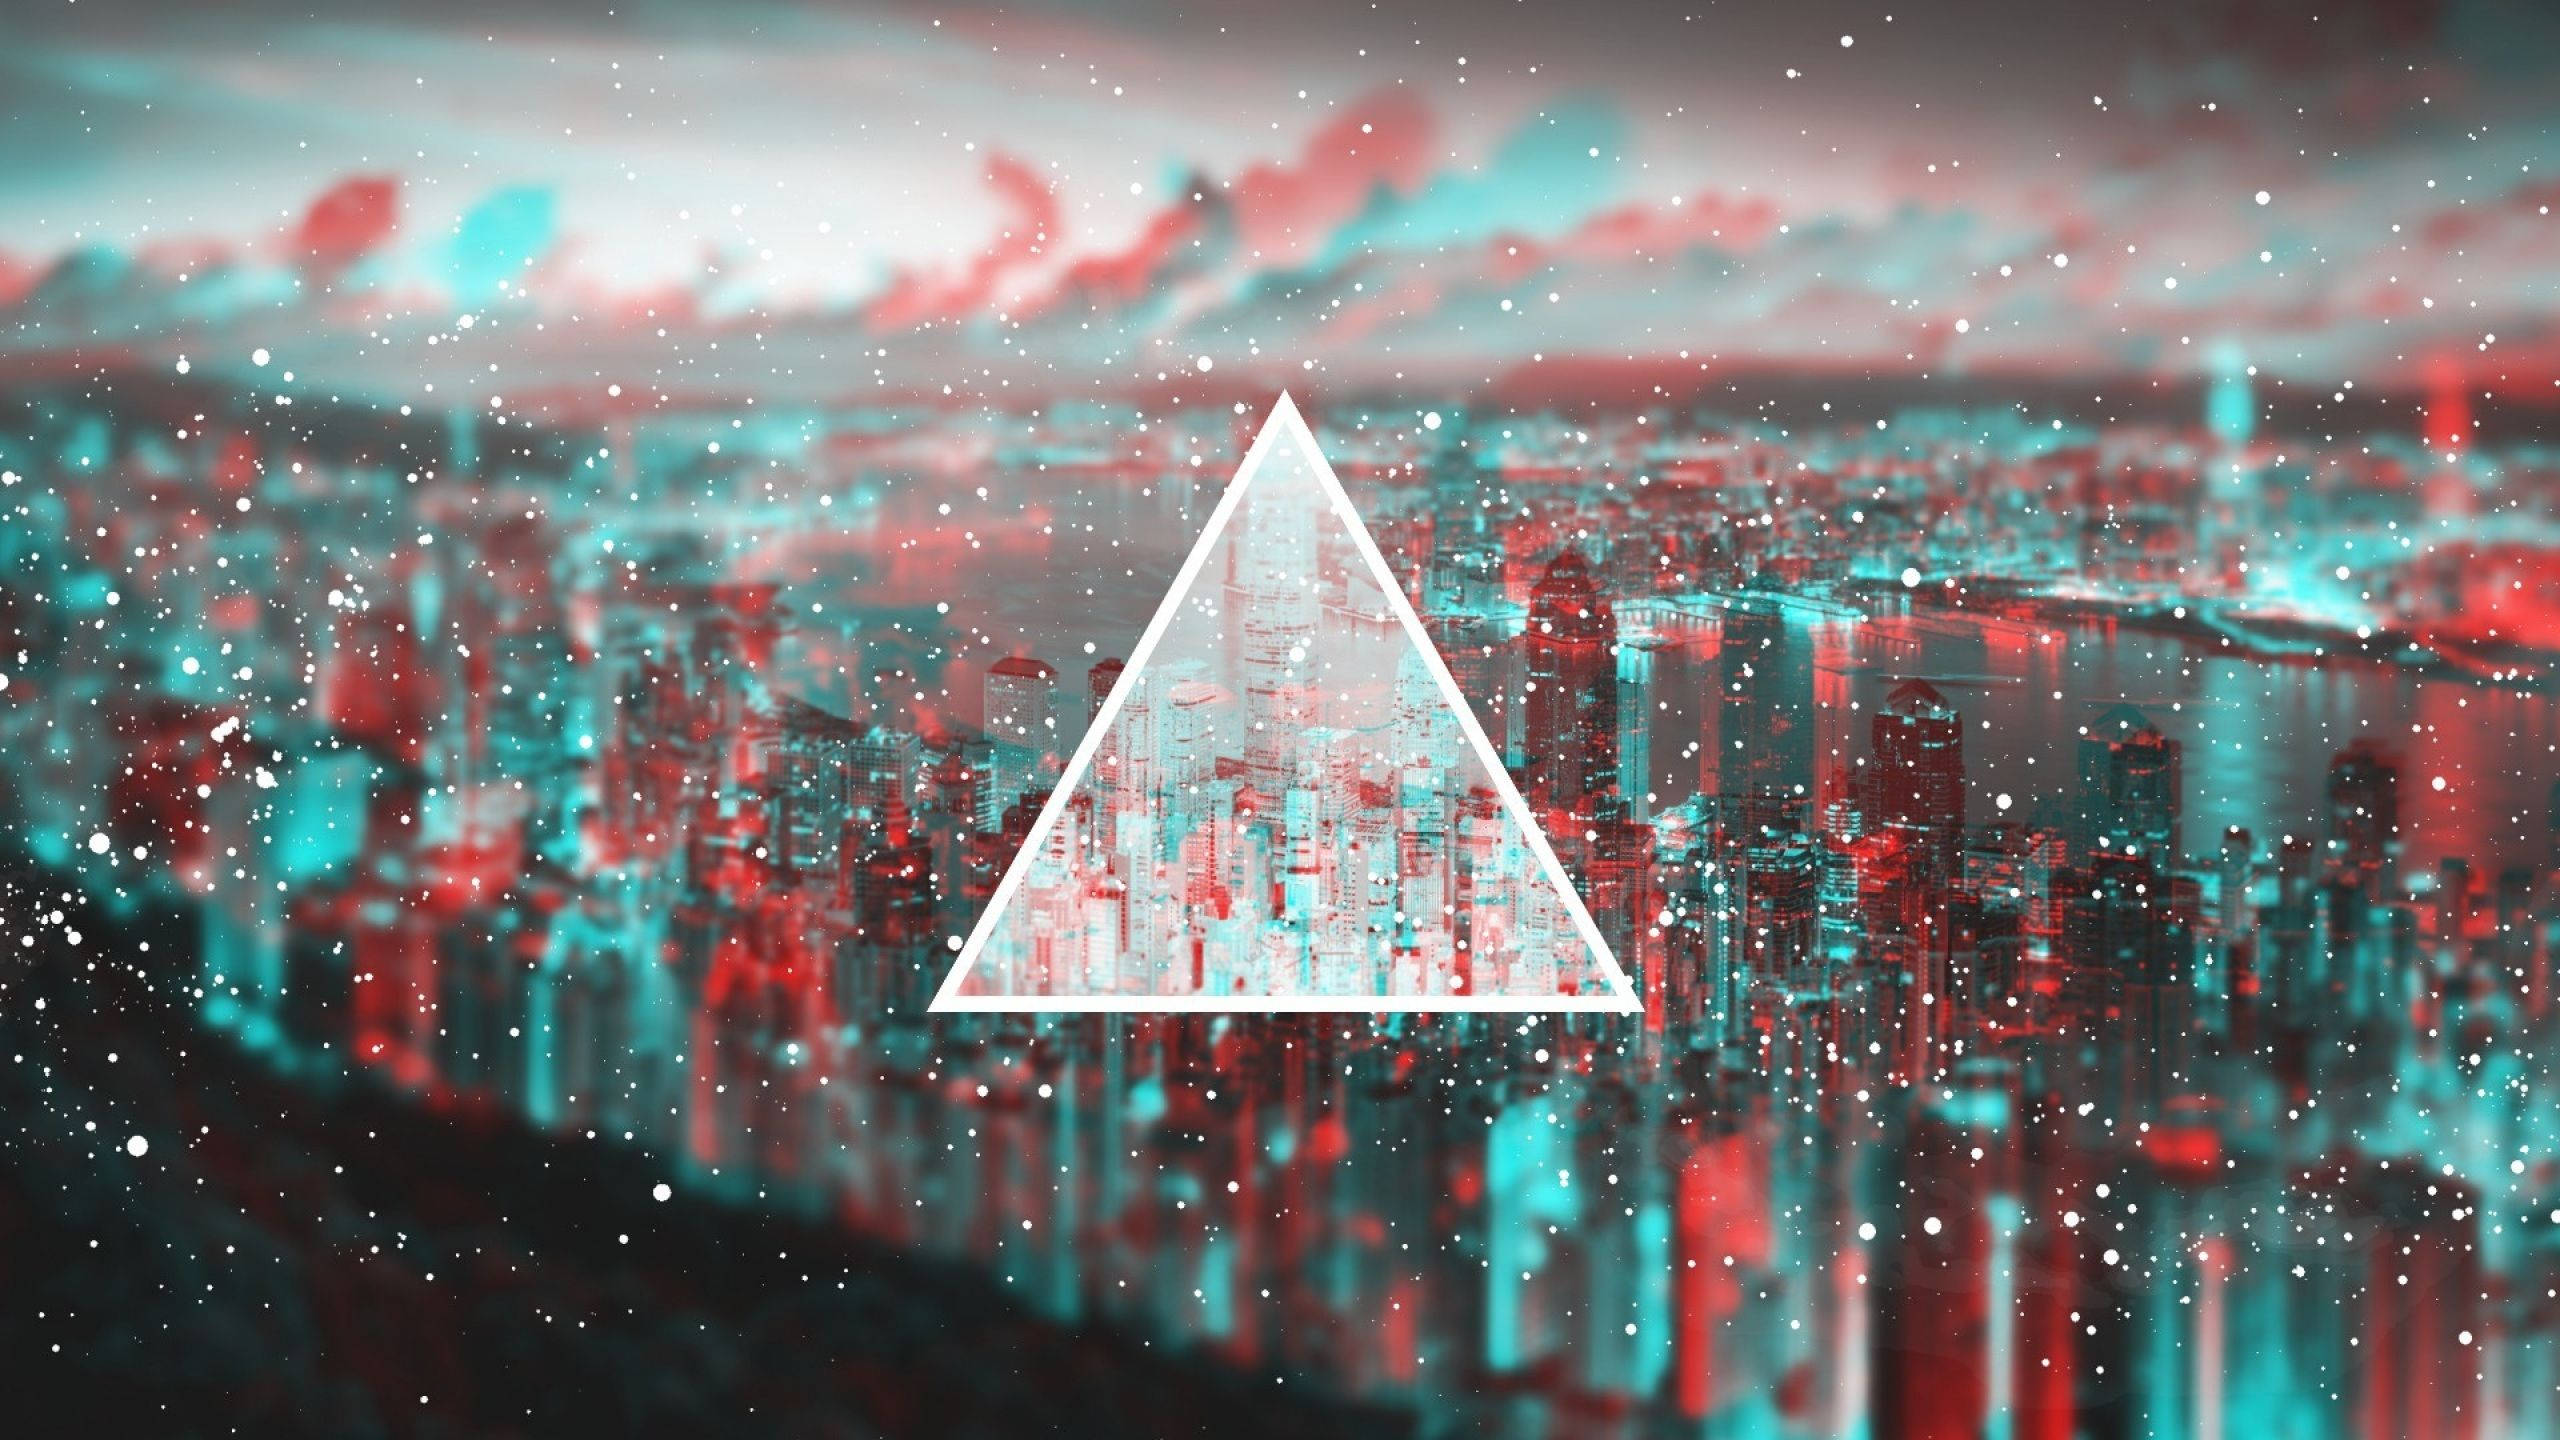 Cool Triangle Poster Background